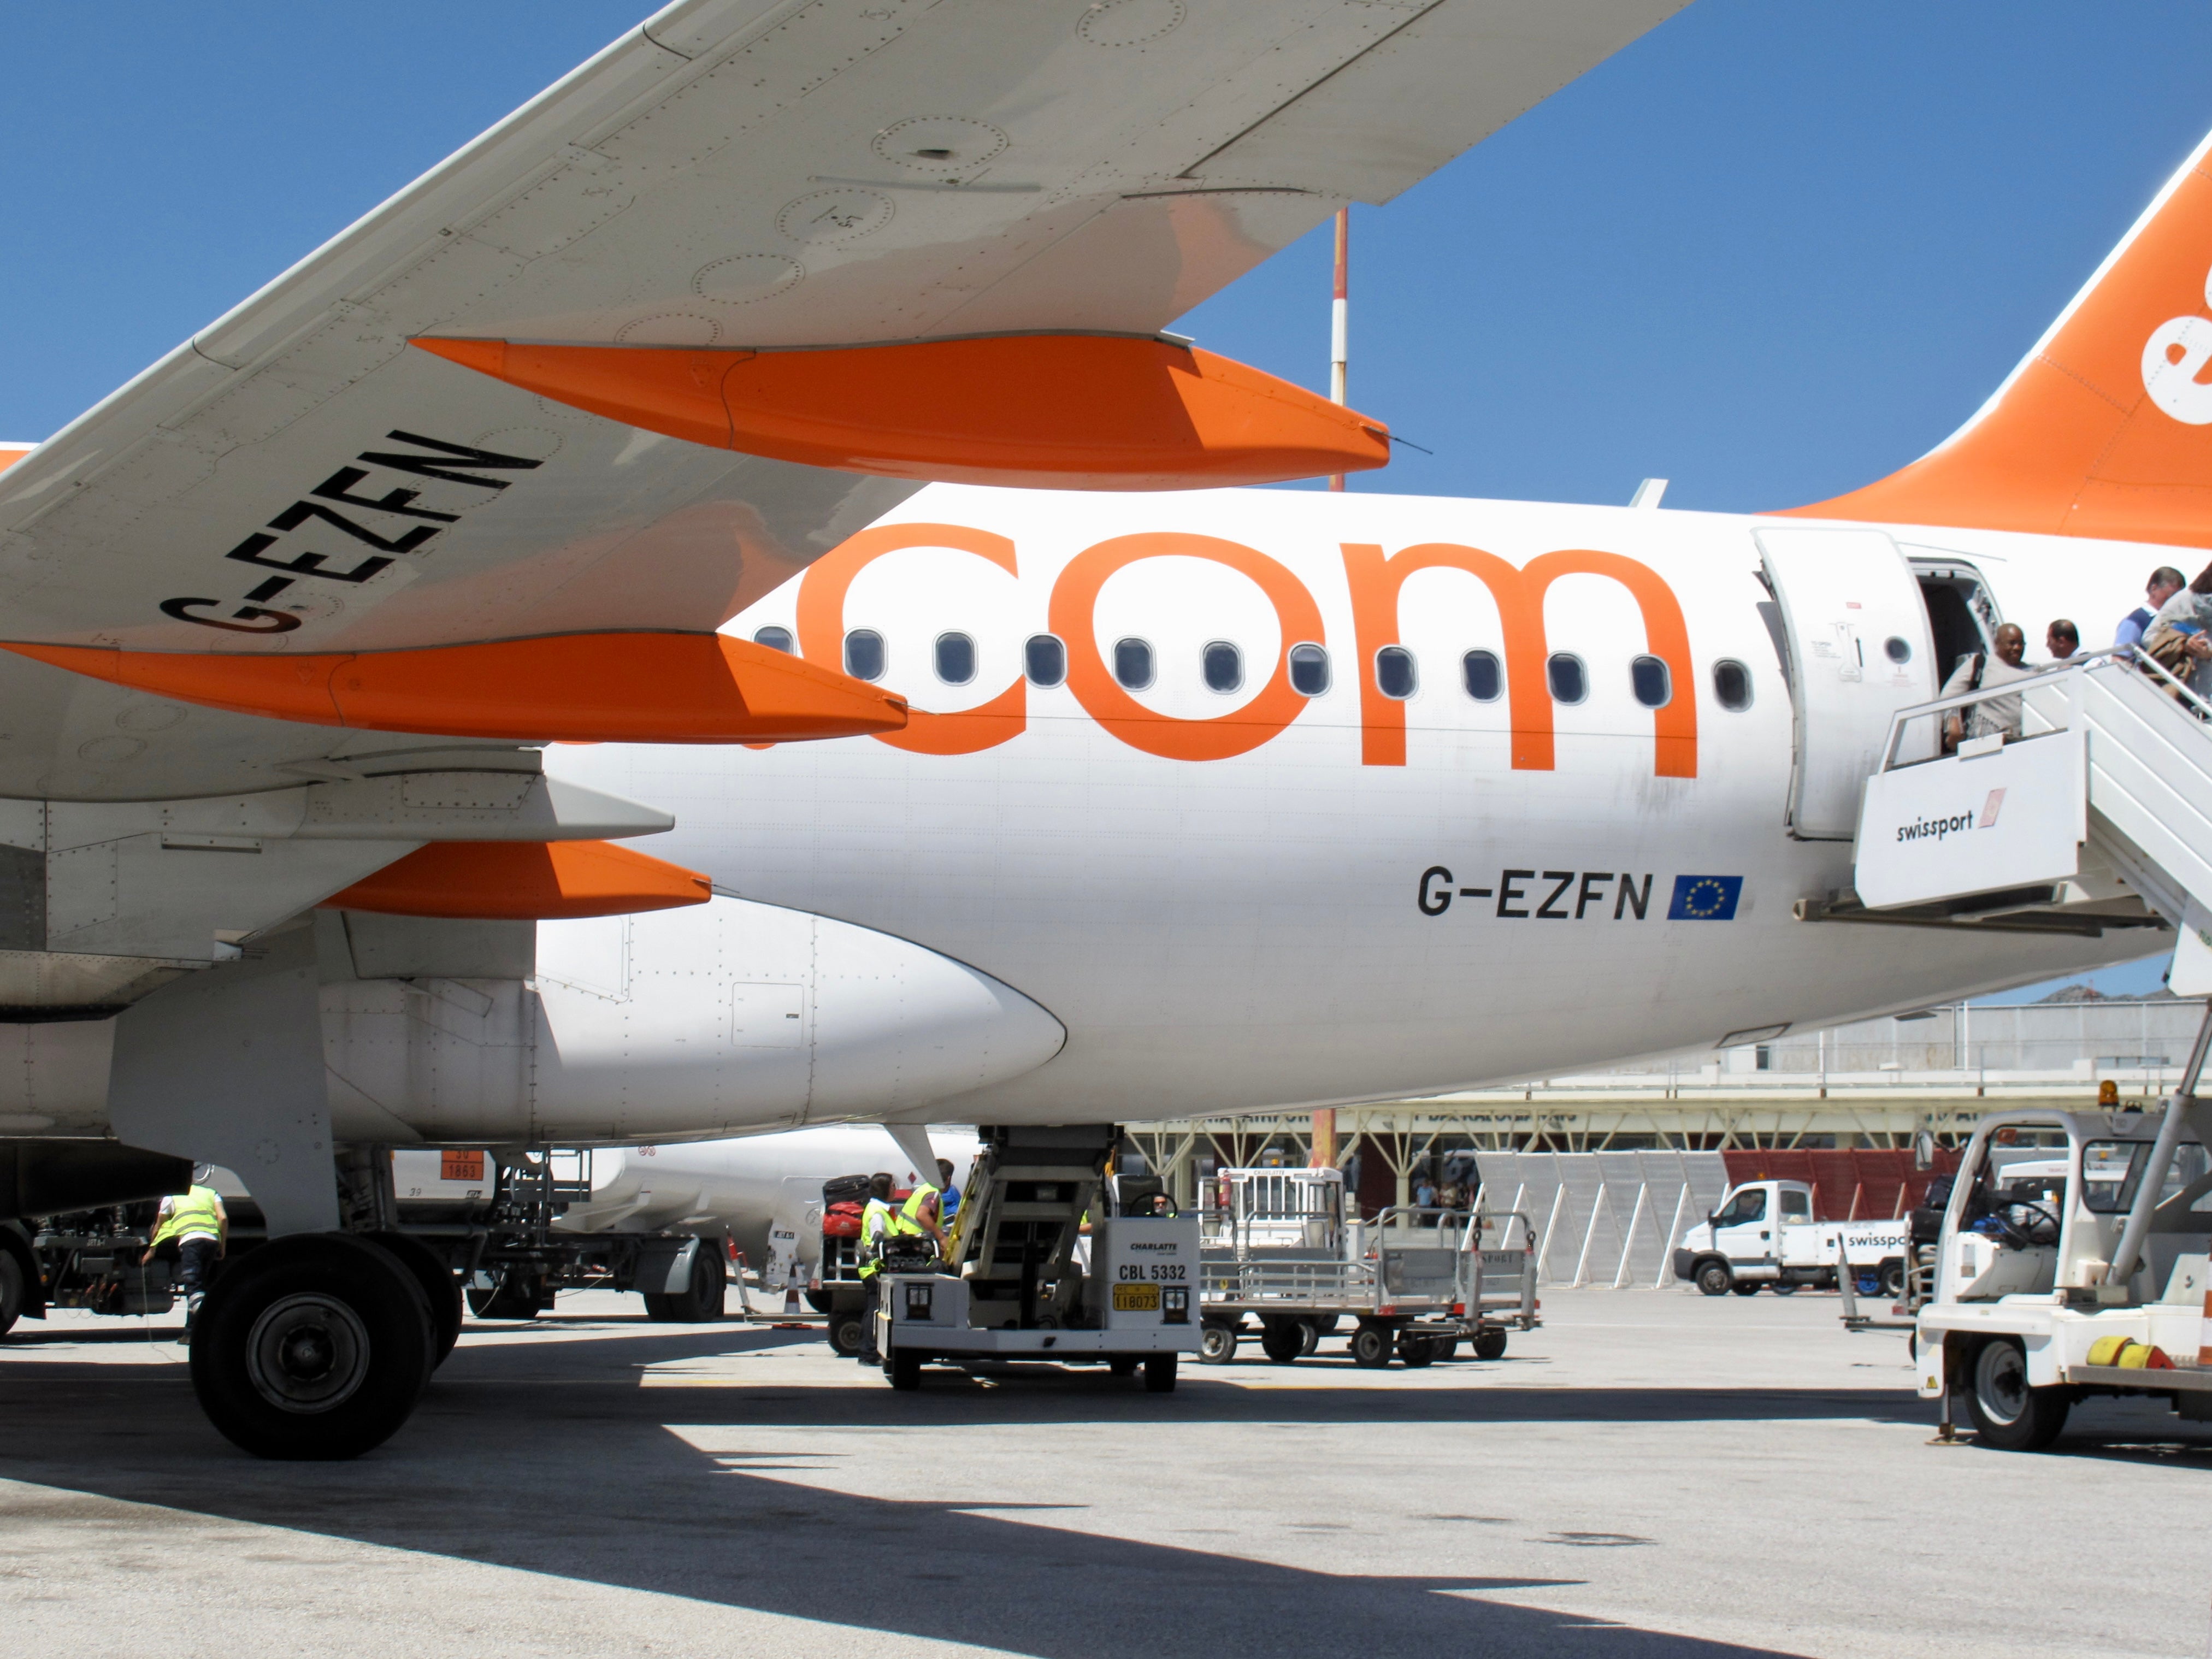 Ground stop: easyJet Airbus A320 at Catania airport